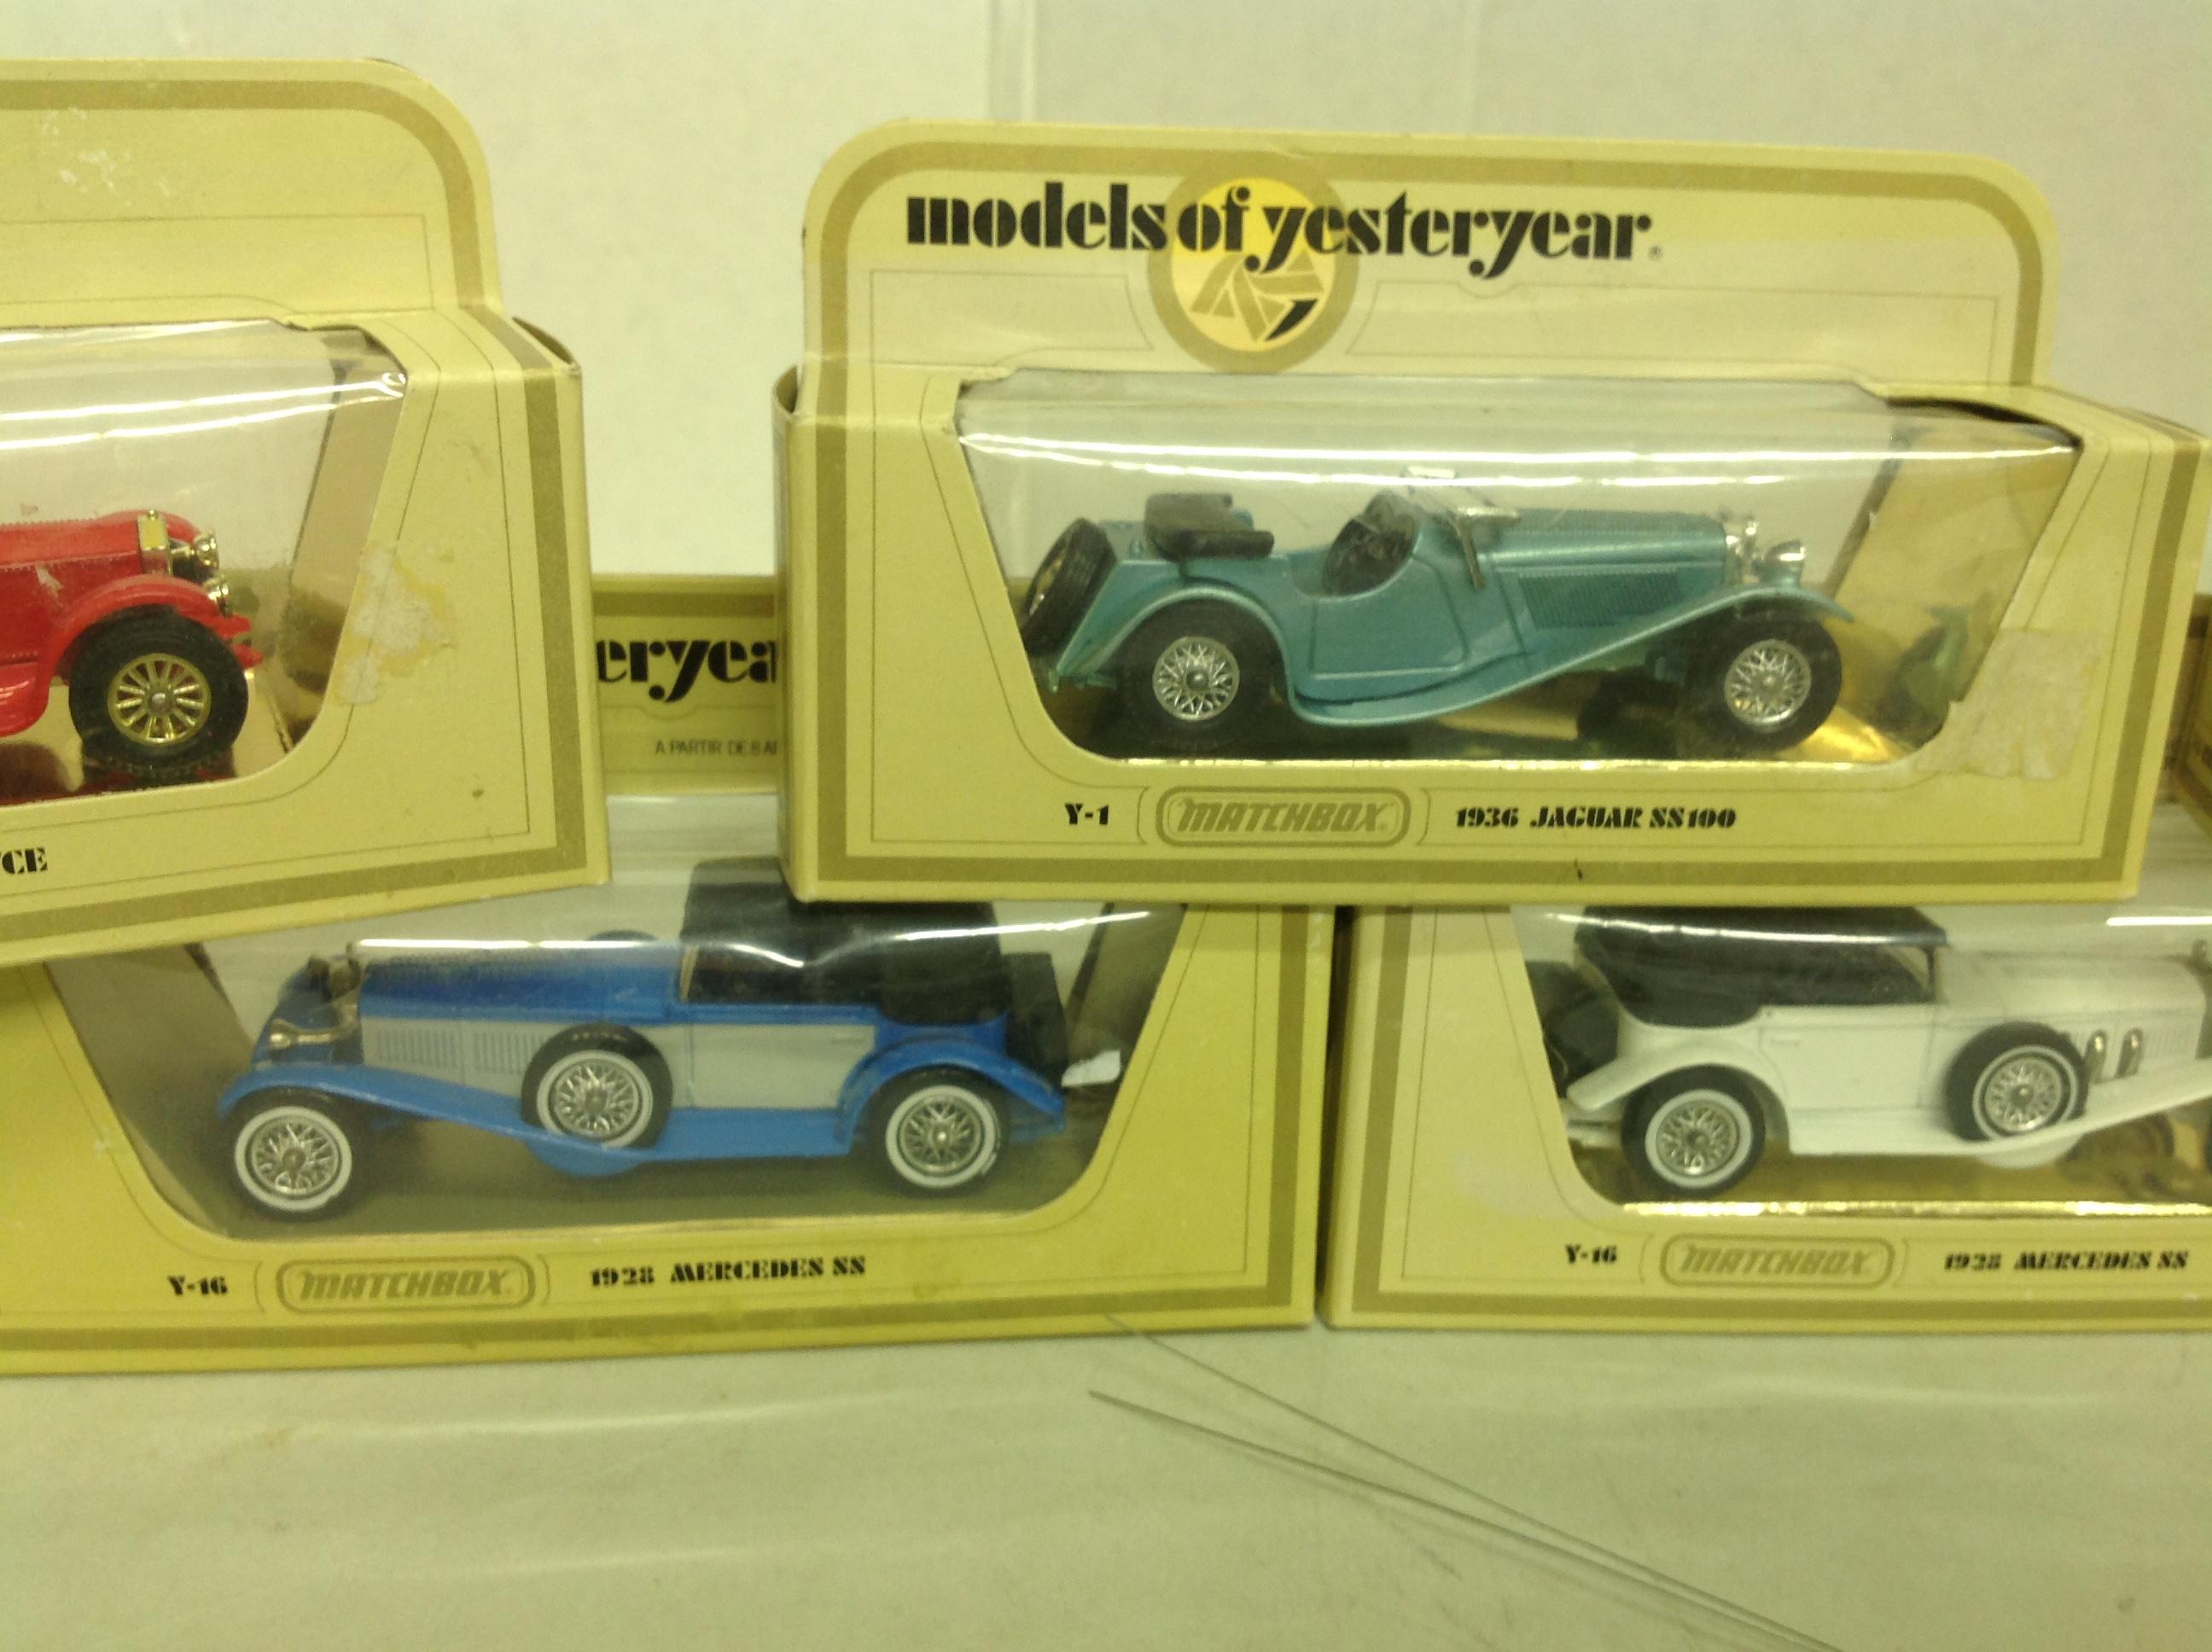 collection of models of yesteryear cars, Match Box